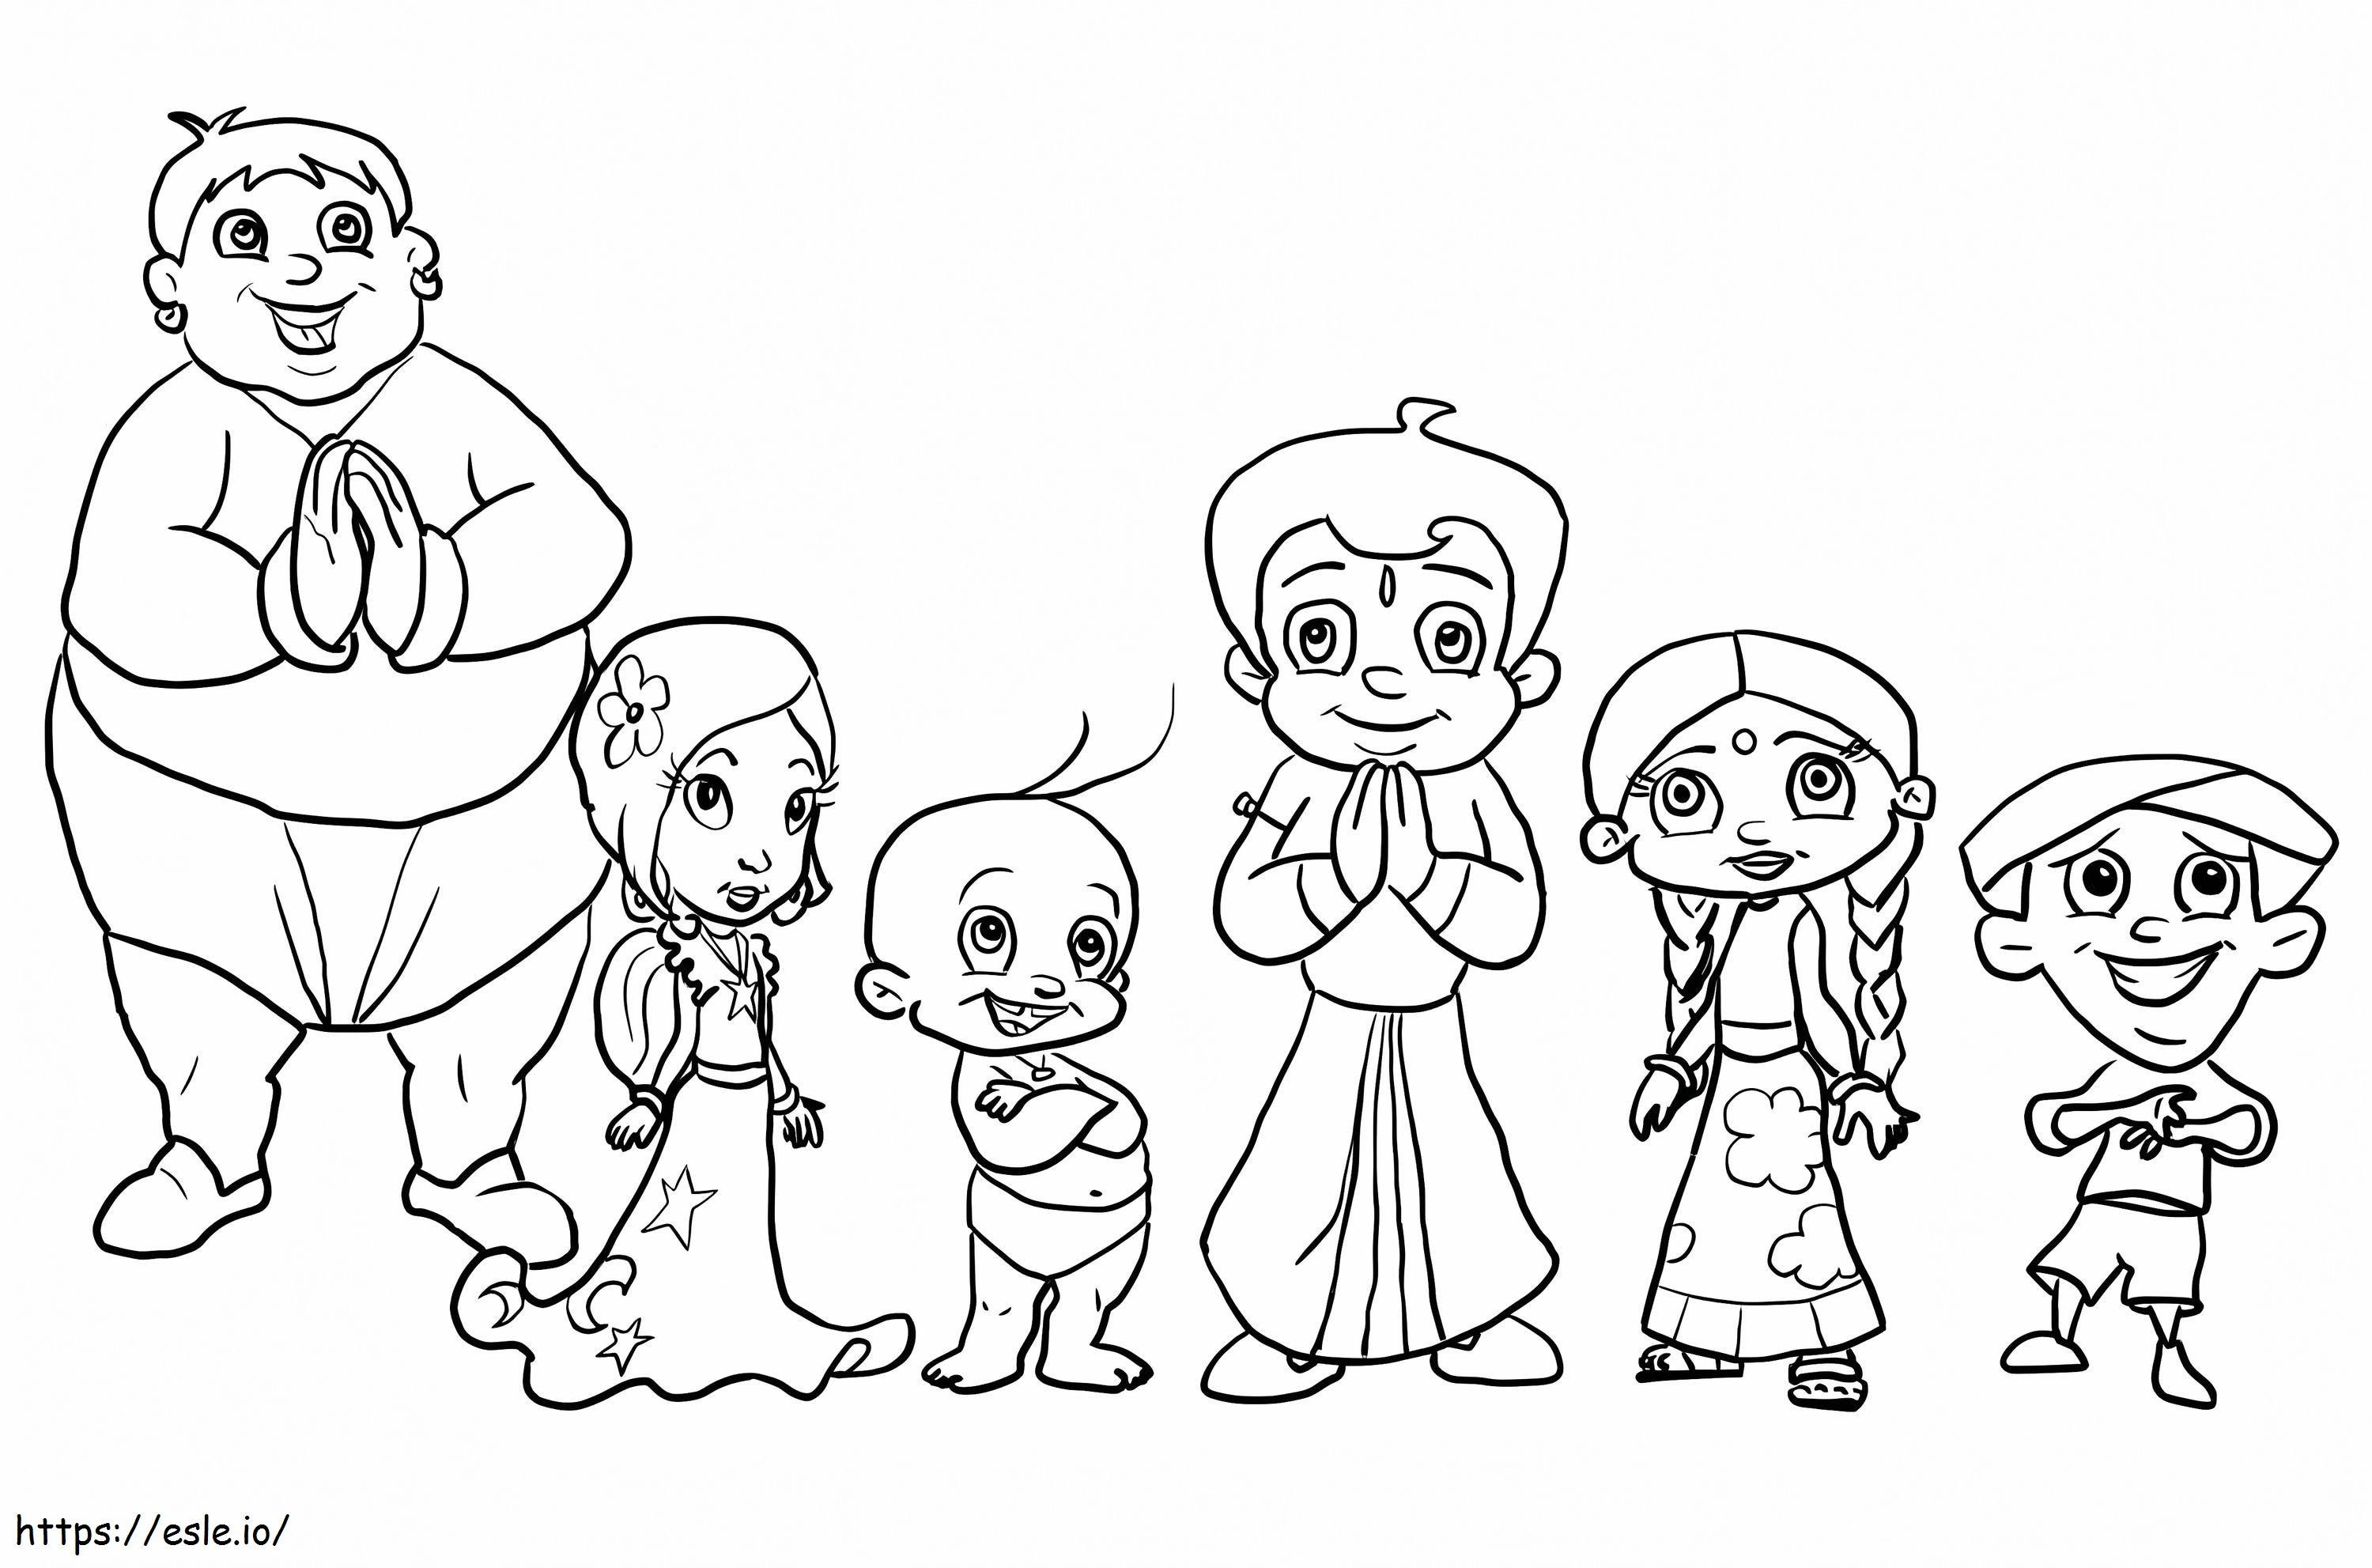 Characters From Chhota Bheem coloring page